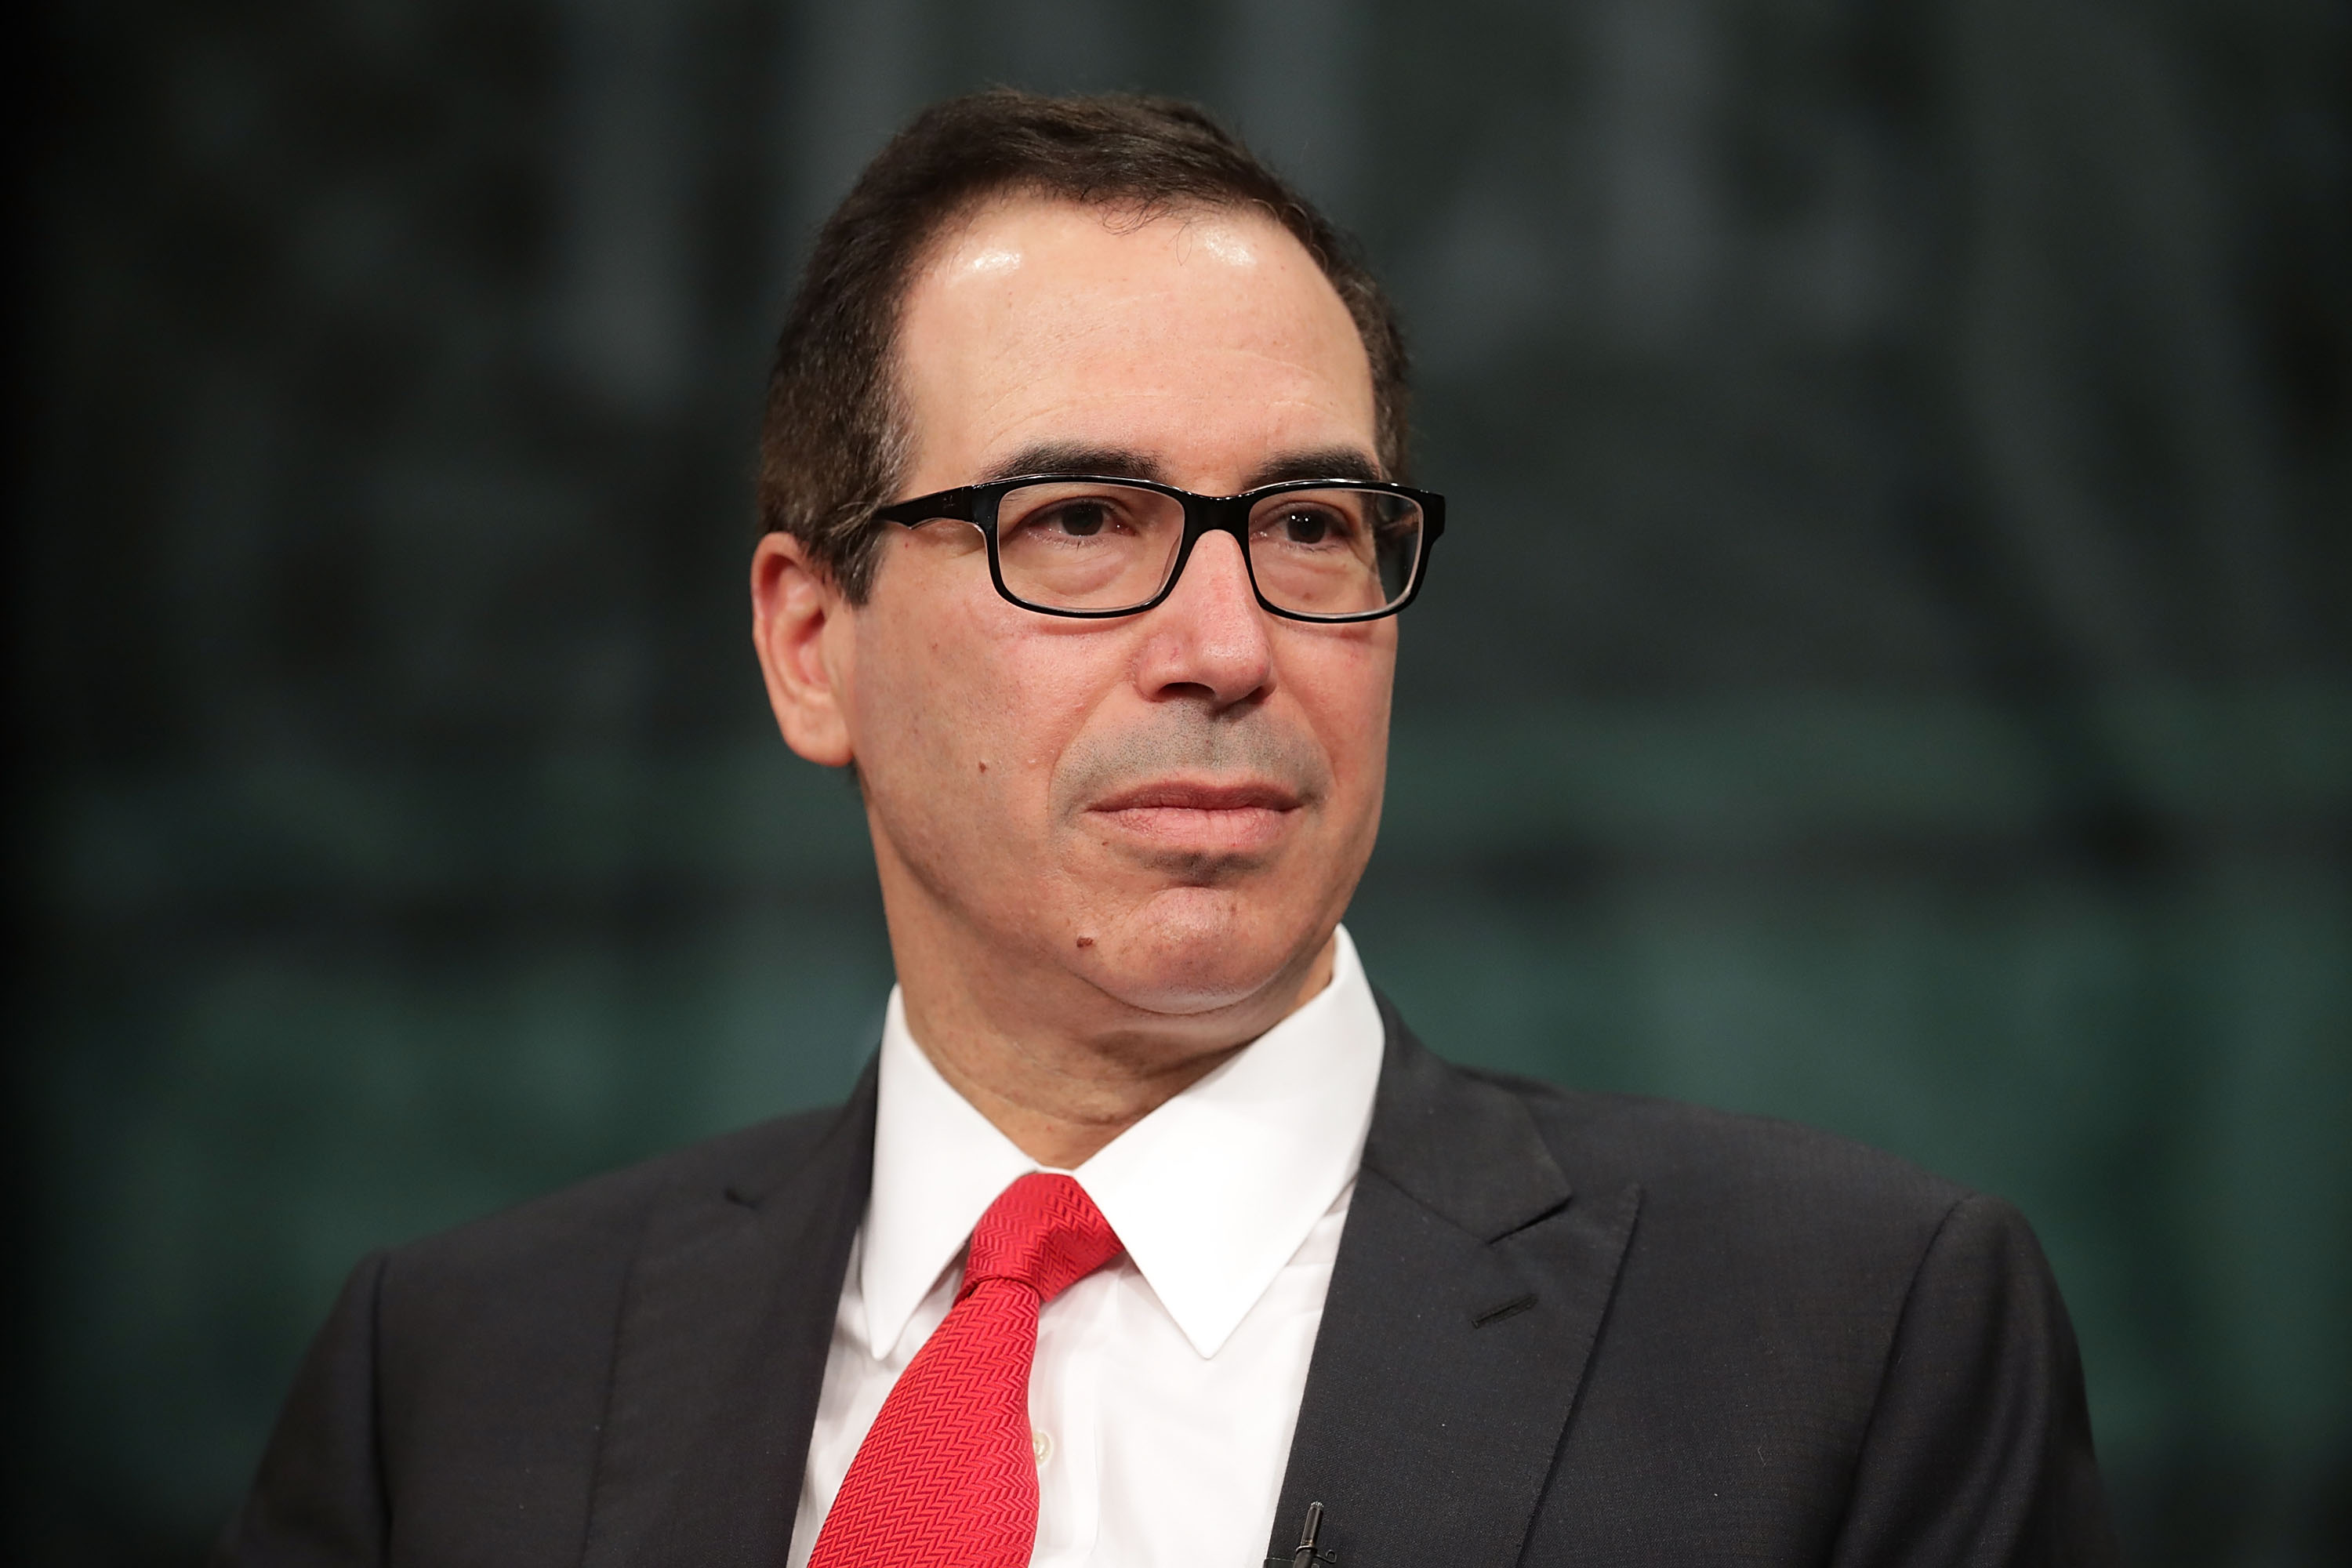 Treasury Secretary Steven Mnuchin participates in an interview during The Hill's Newsmaker Series "Prospects for Tax Reform" at the Newseum April 26, 2017 in Washington, DC. (Chip Somodevilla&mdash;Getty Images)